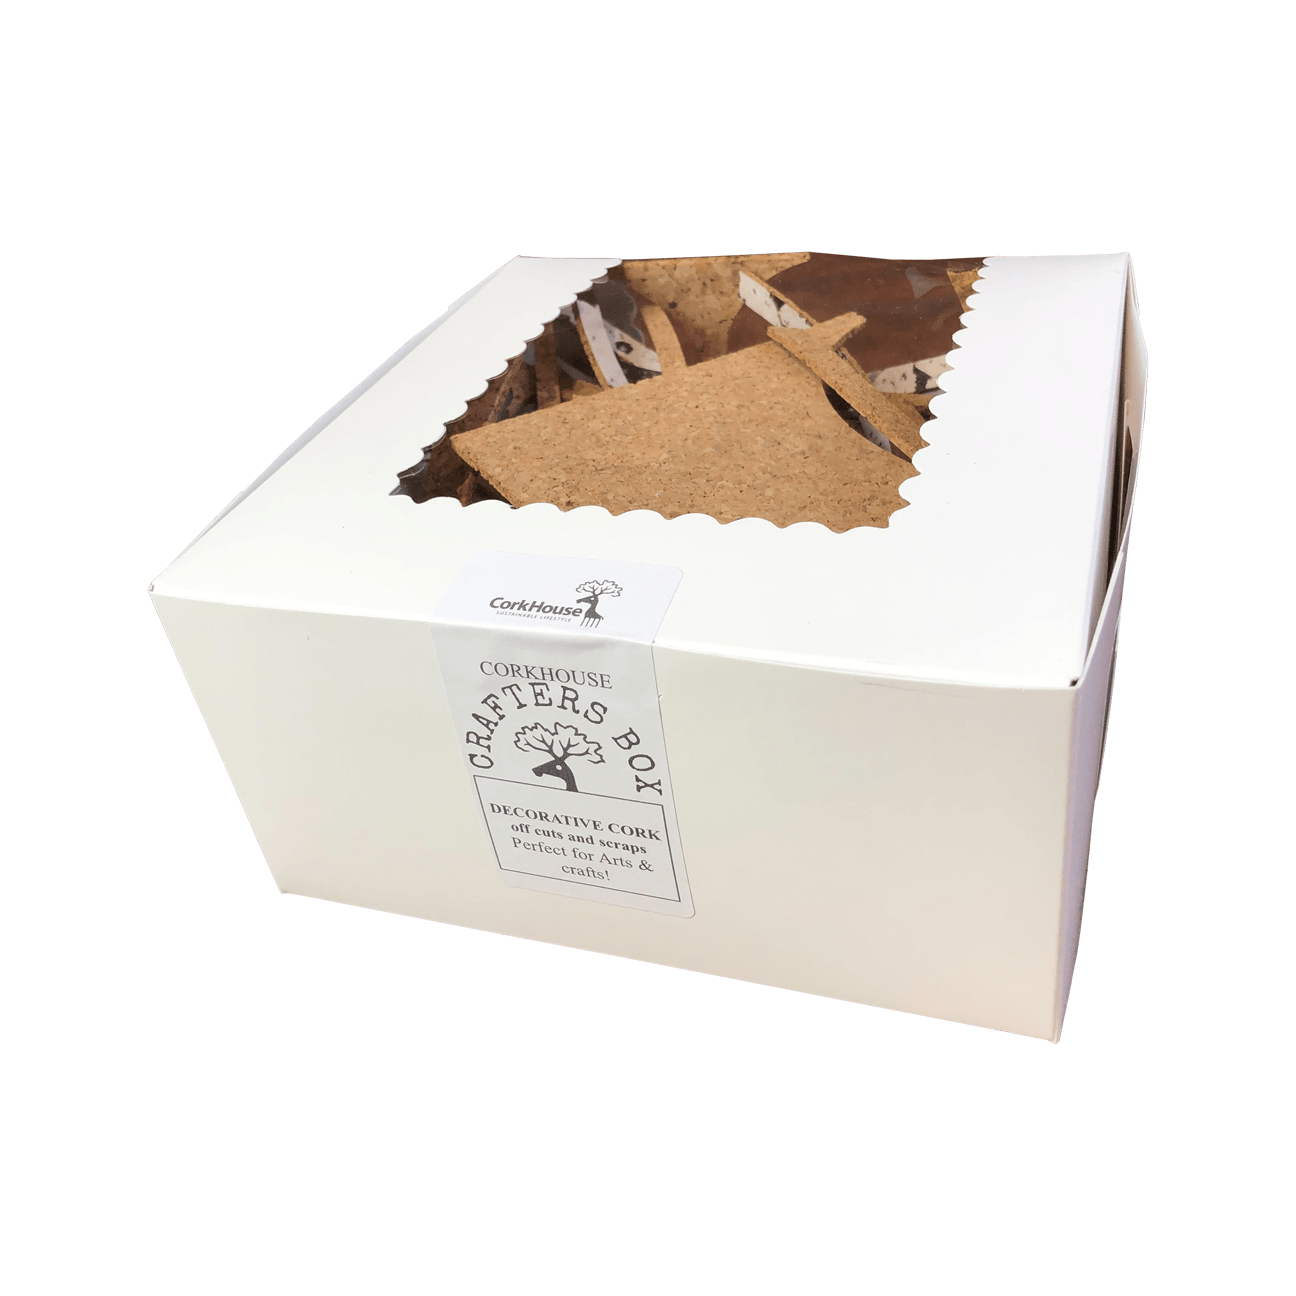 CorkHouse Cork Scrap Box 0.5 Lb. CorkHouse CRAFTERS BOX Cork Scraps Box for crafting - POS ONLY